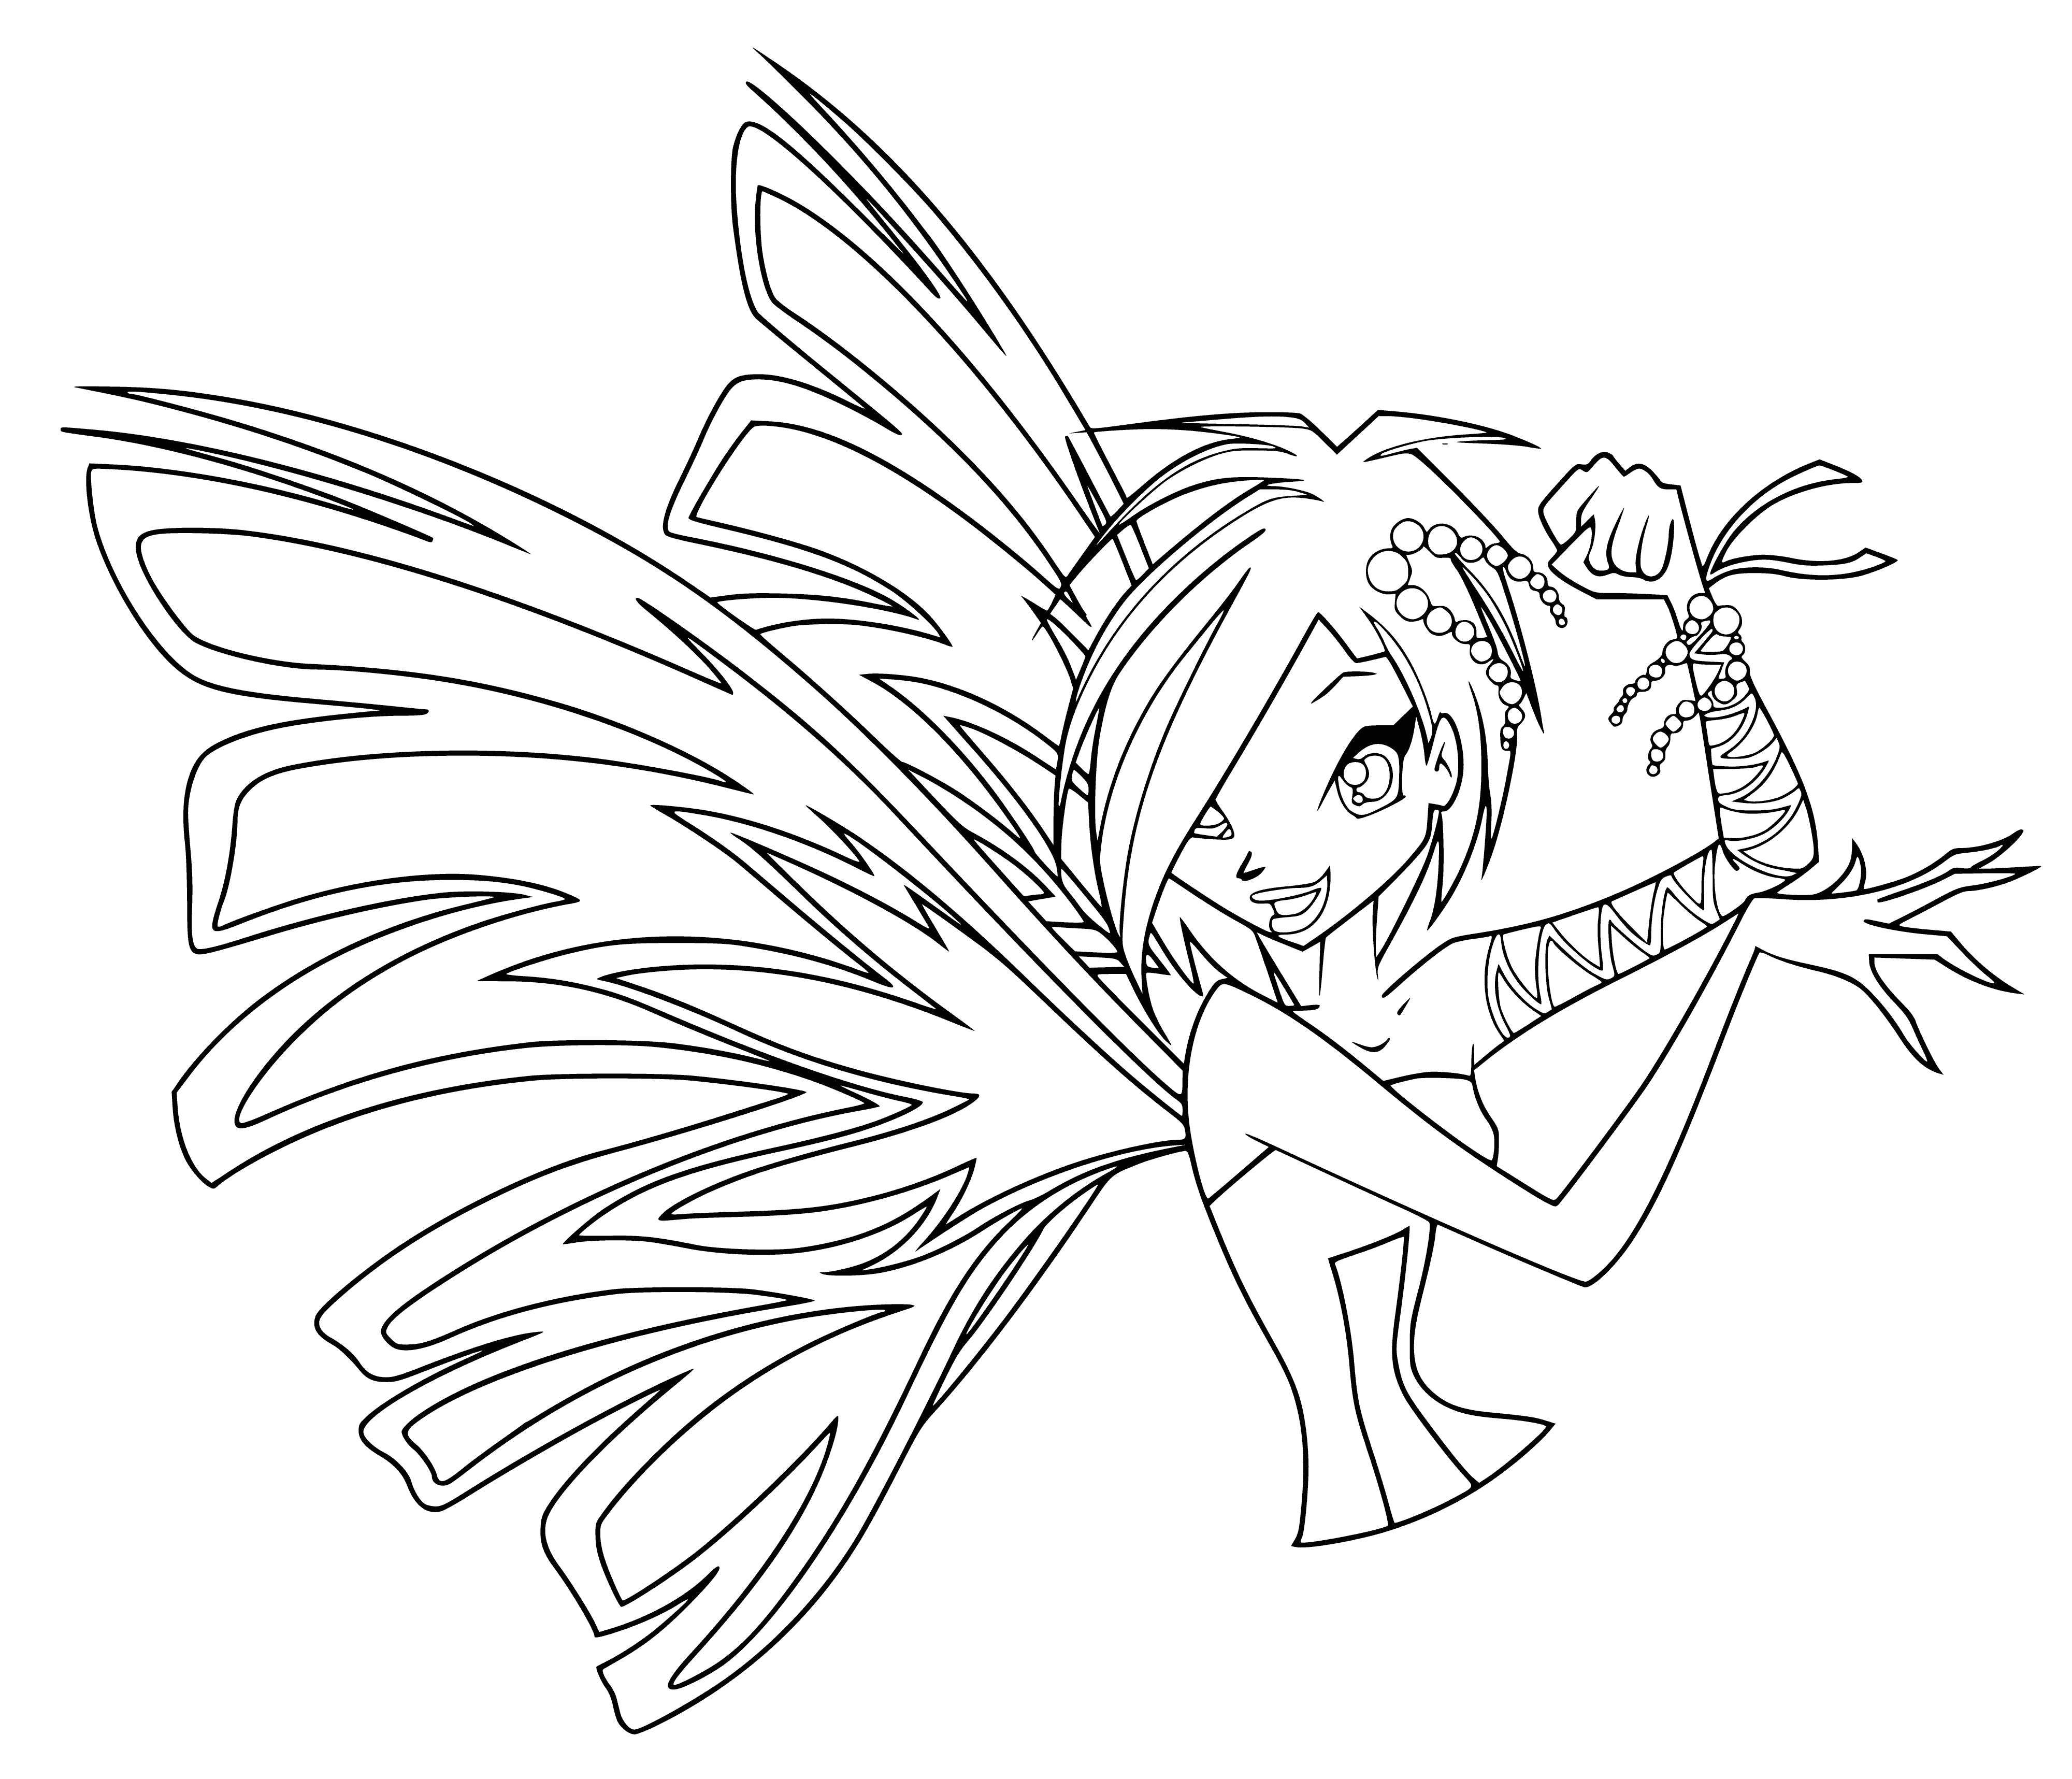 Tecna achieved Sirenix while wearing a blue and white dress, with a shell in her hair and holding a staff. Her wings were blue and white.